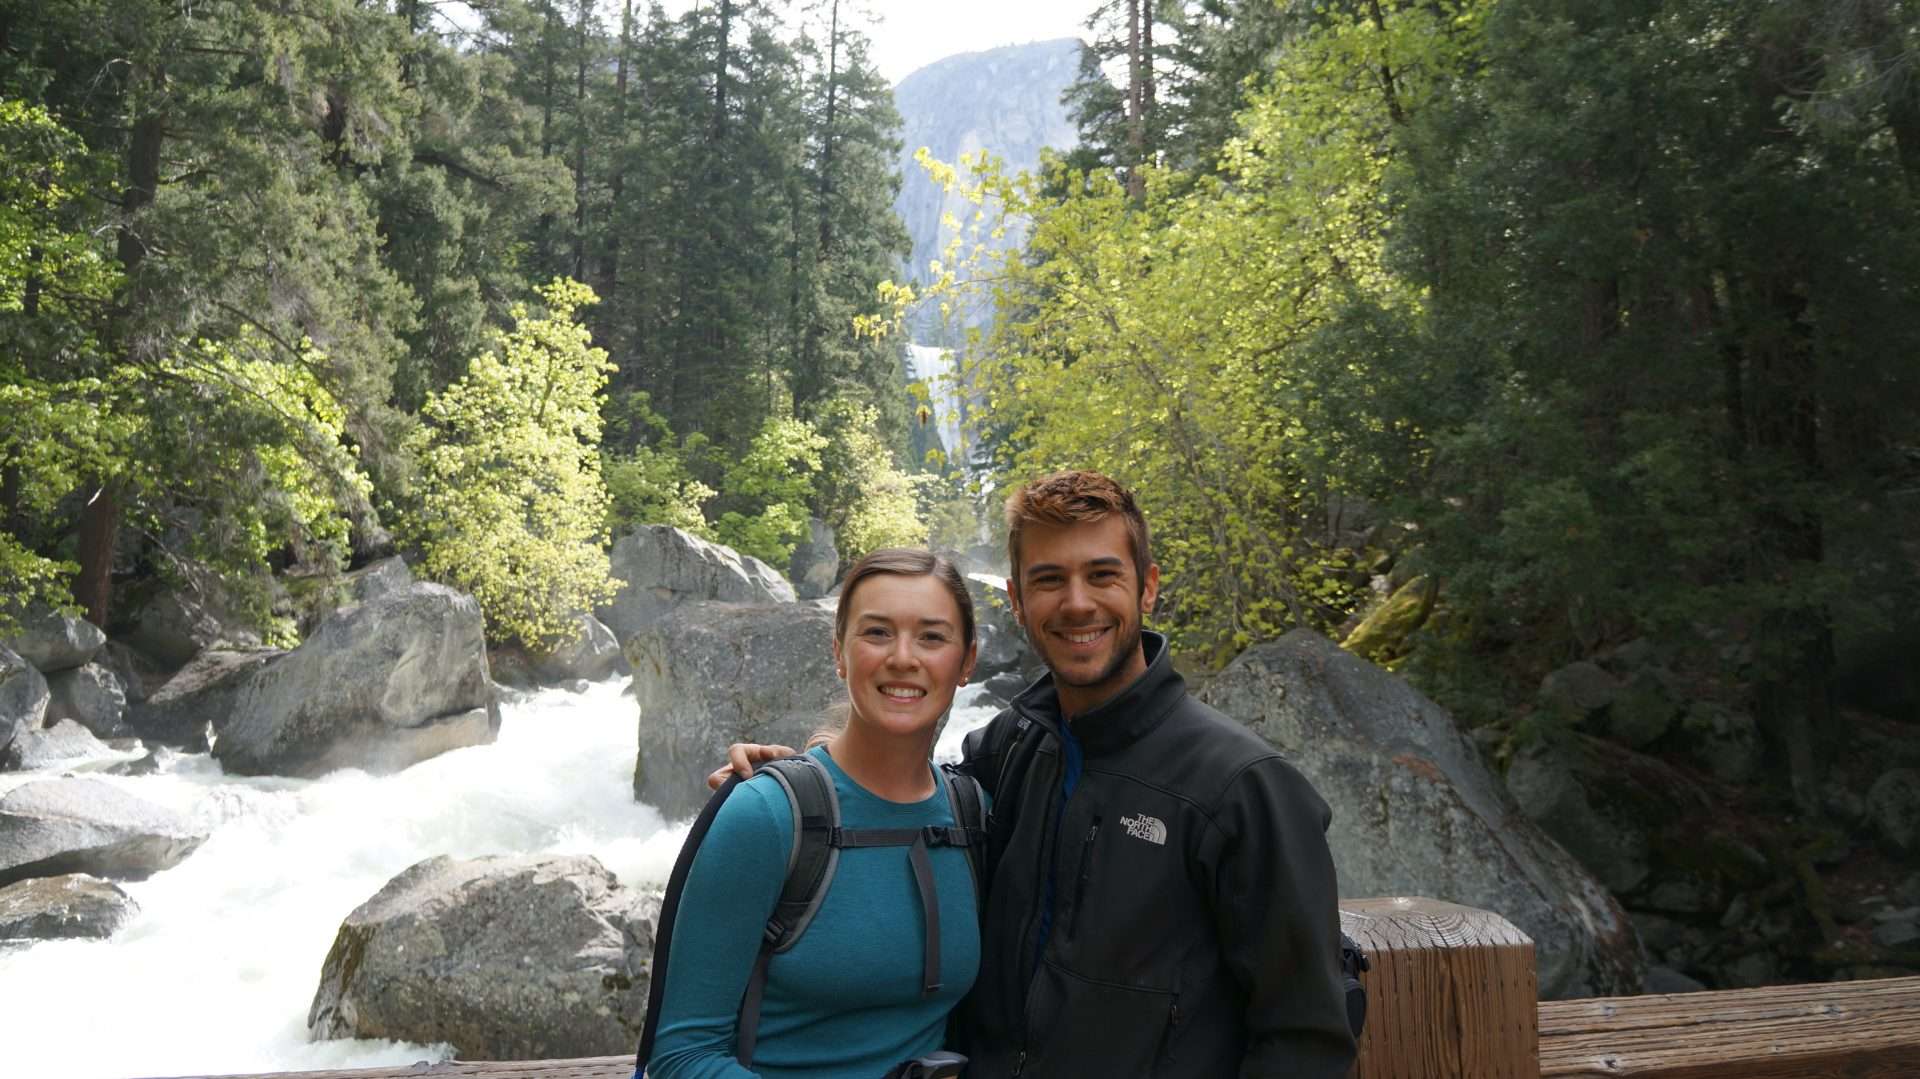 Tom and Cait from Mortons on the move in Yosemite by waterfall